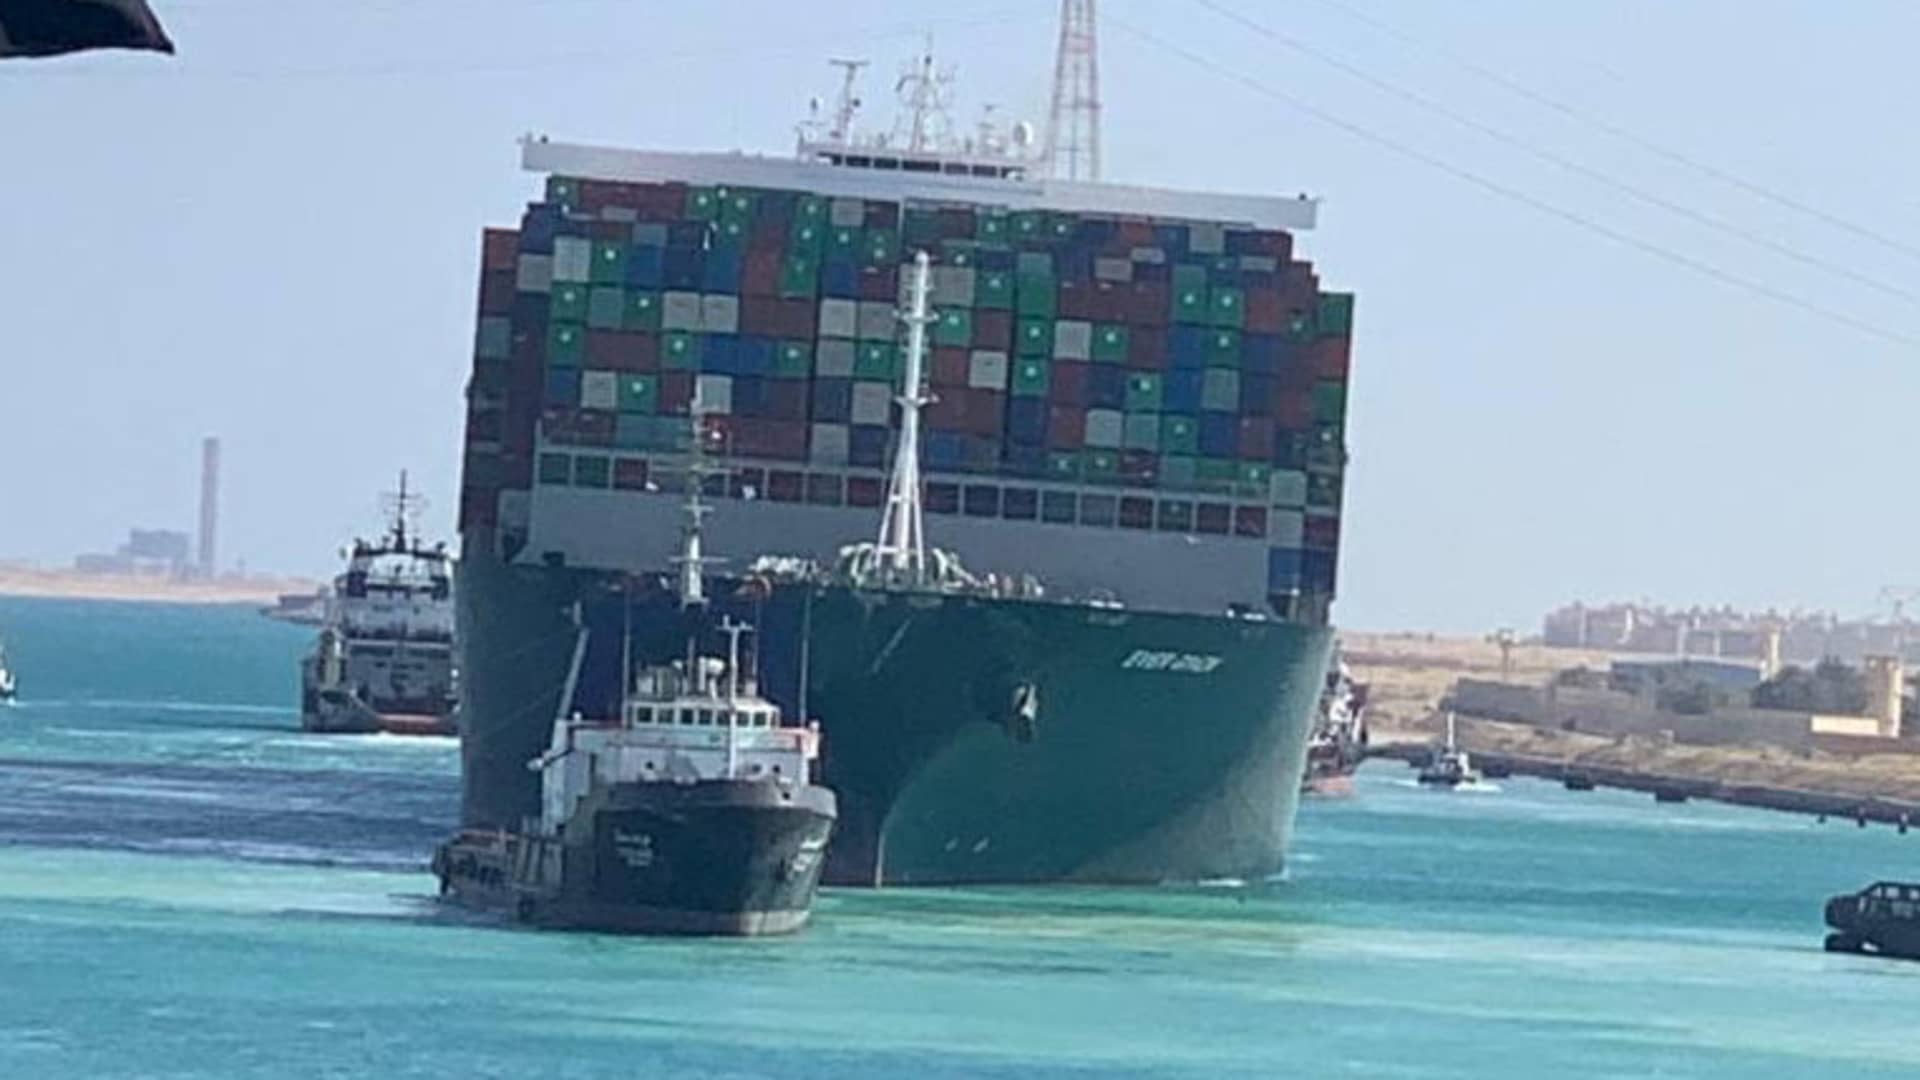 Ship Ever Given, one of the world's largest container ships, is seen after it was fully floated in Suez Canal, Egypt March 29, 2021.